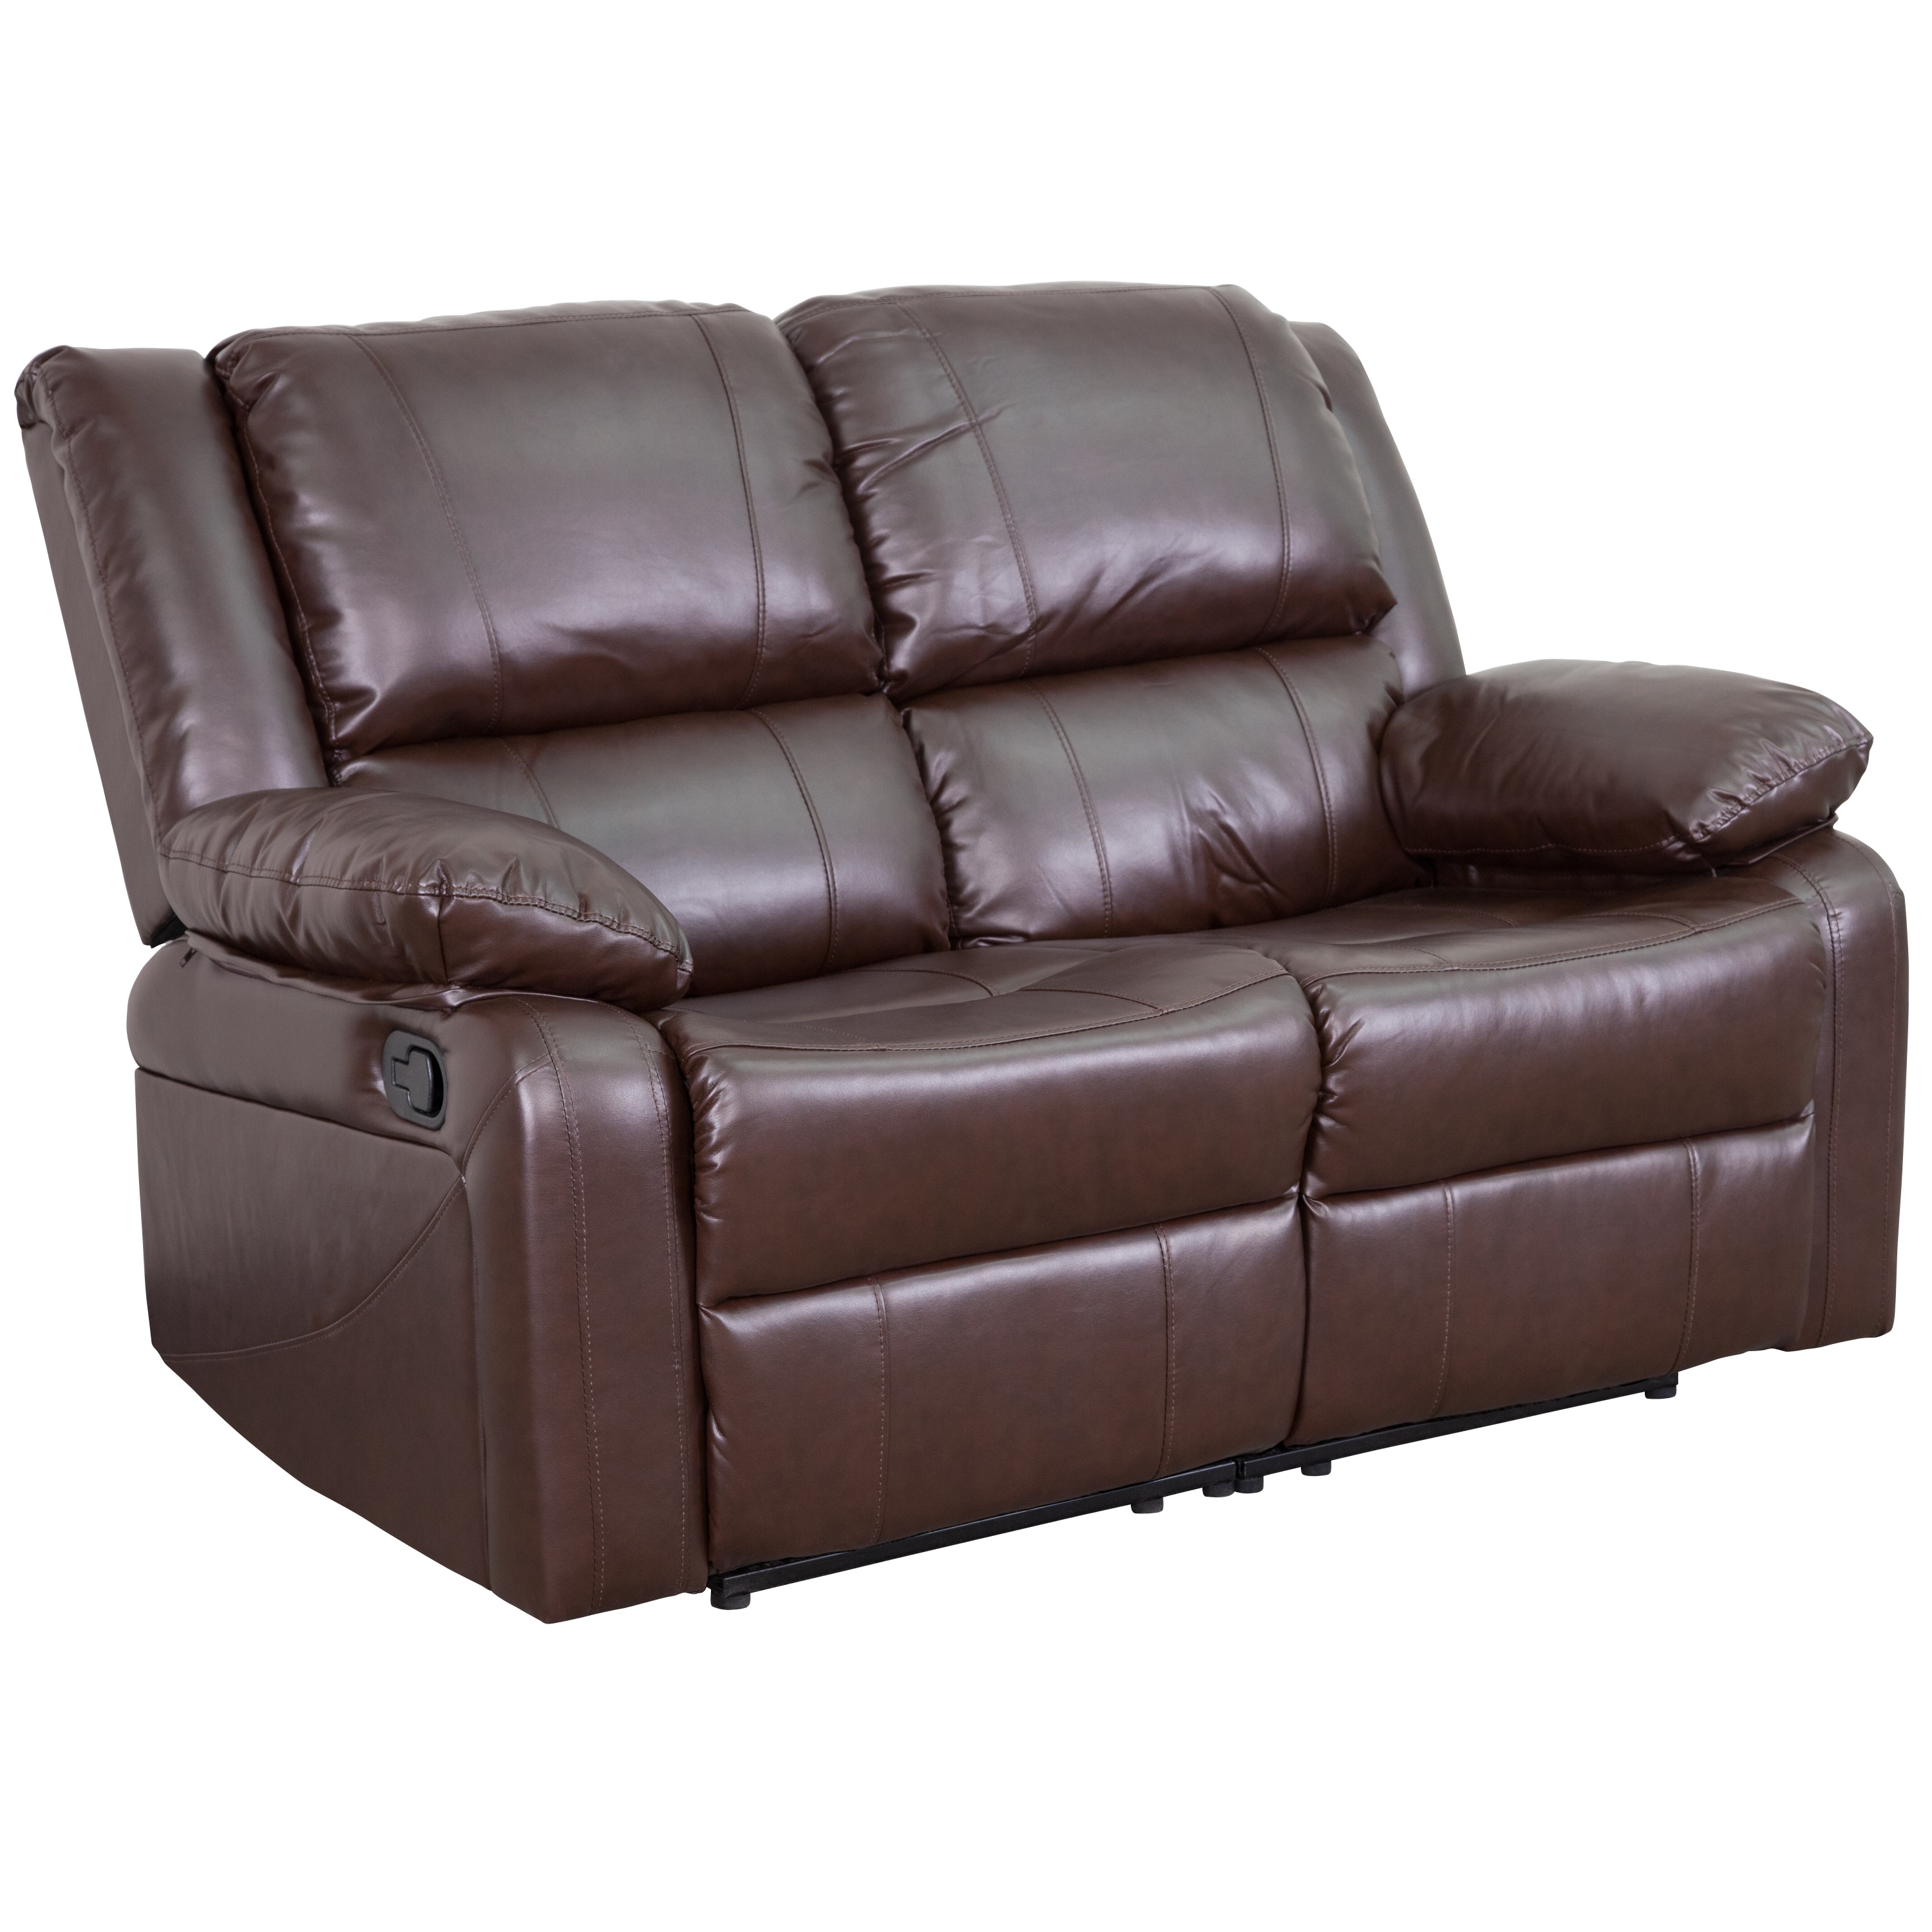 Faux Leather Reclining Loveseat, Brown Leather Loveseat